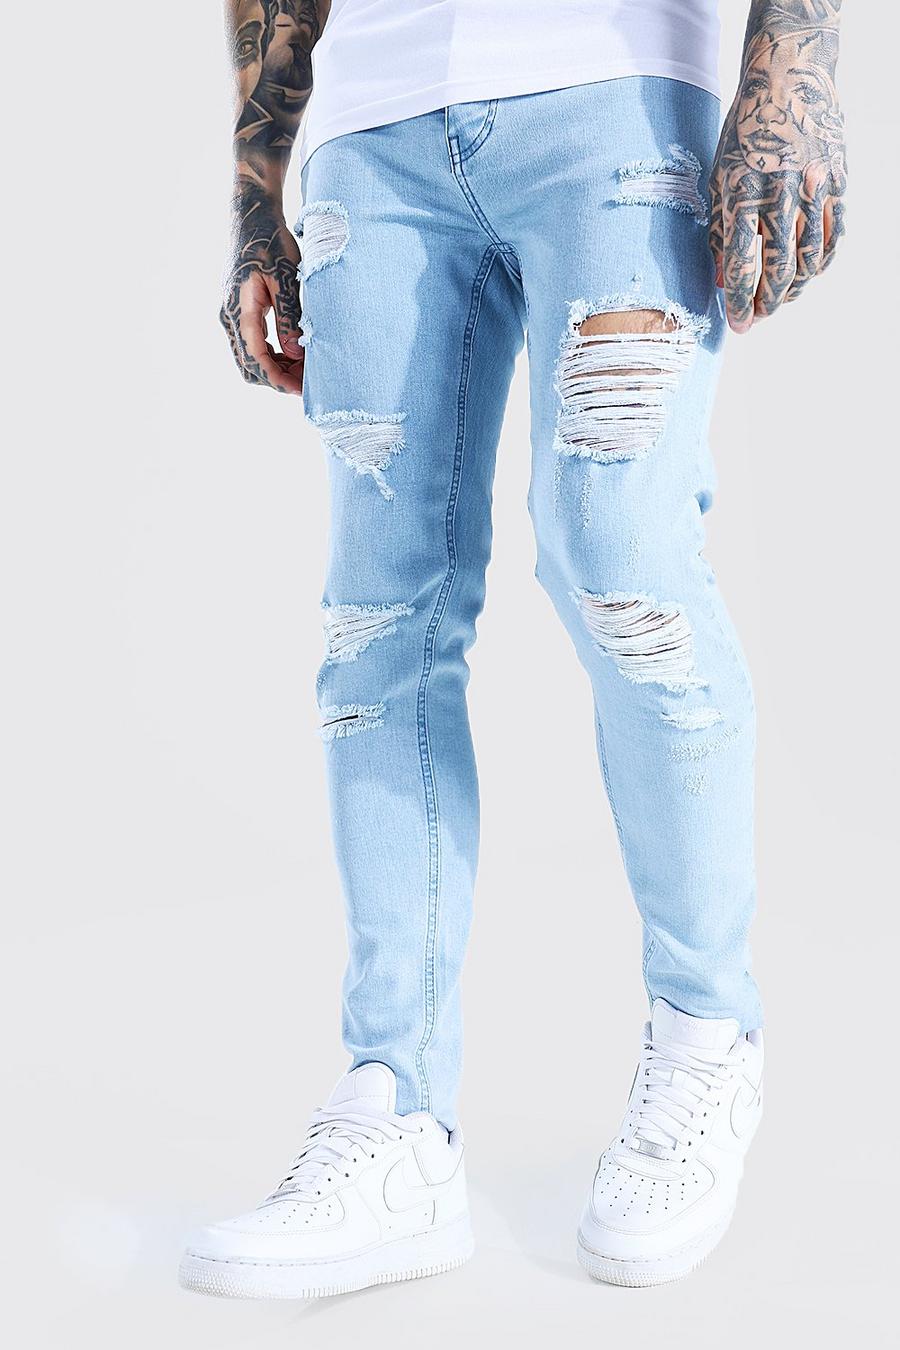 Ripped Skinny Jeans for Men Slim Fit Ripped Stretch Skinny